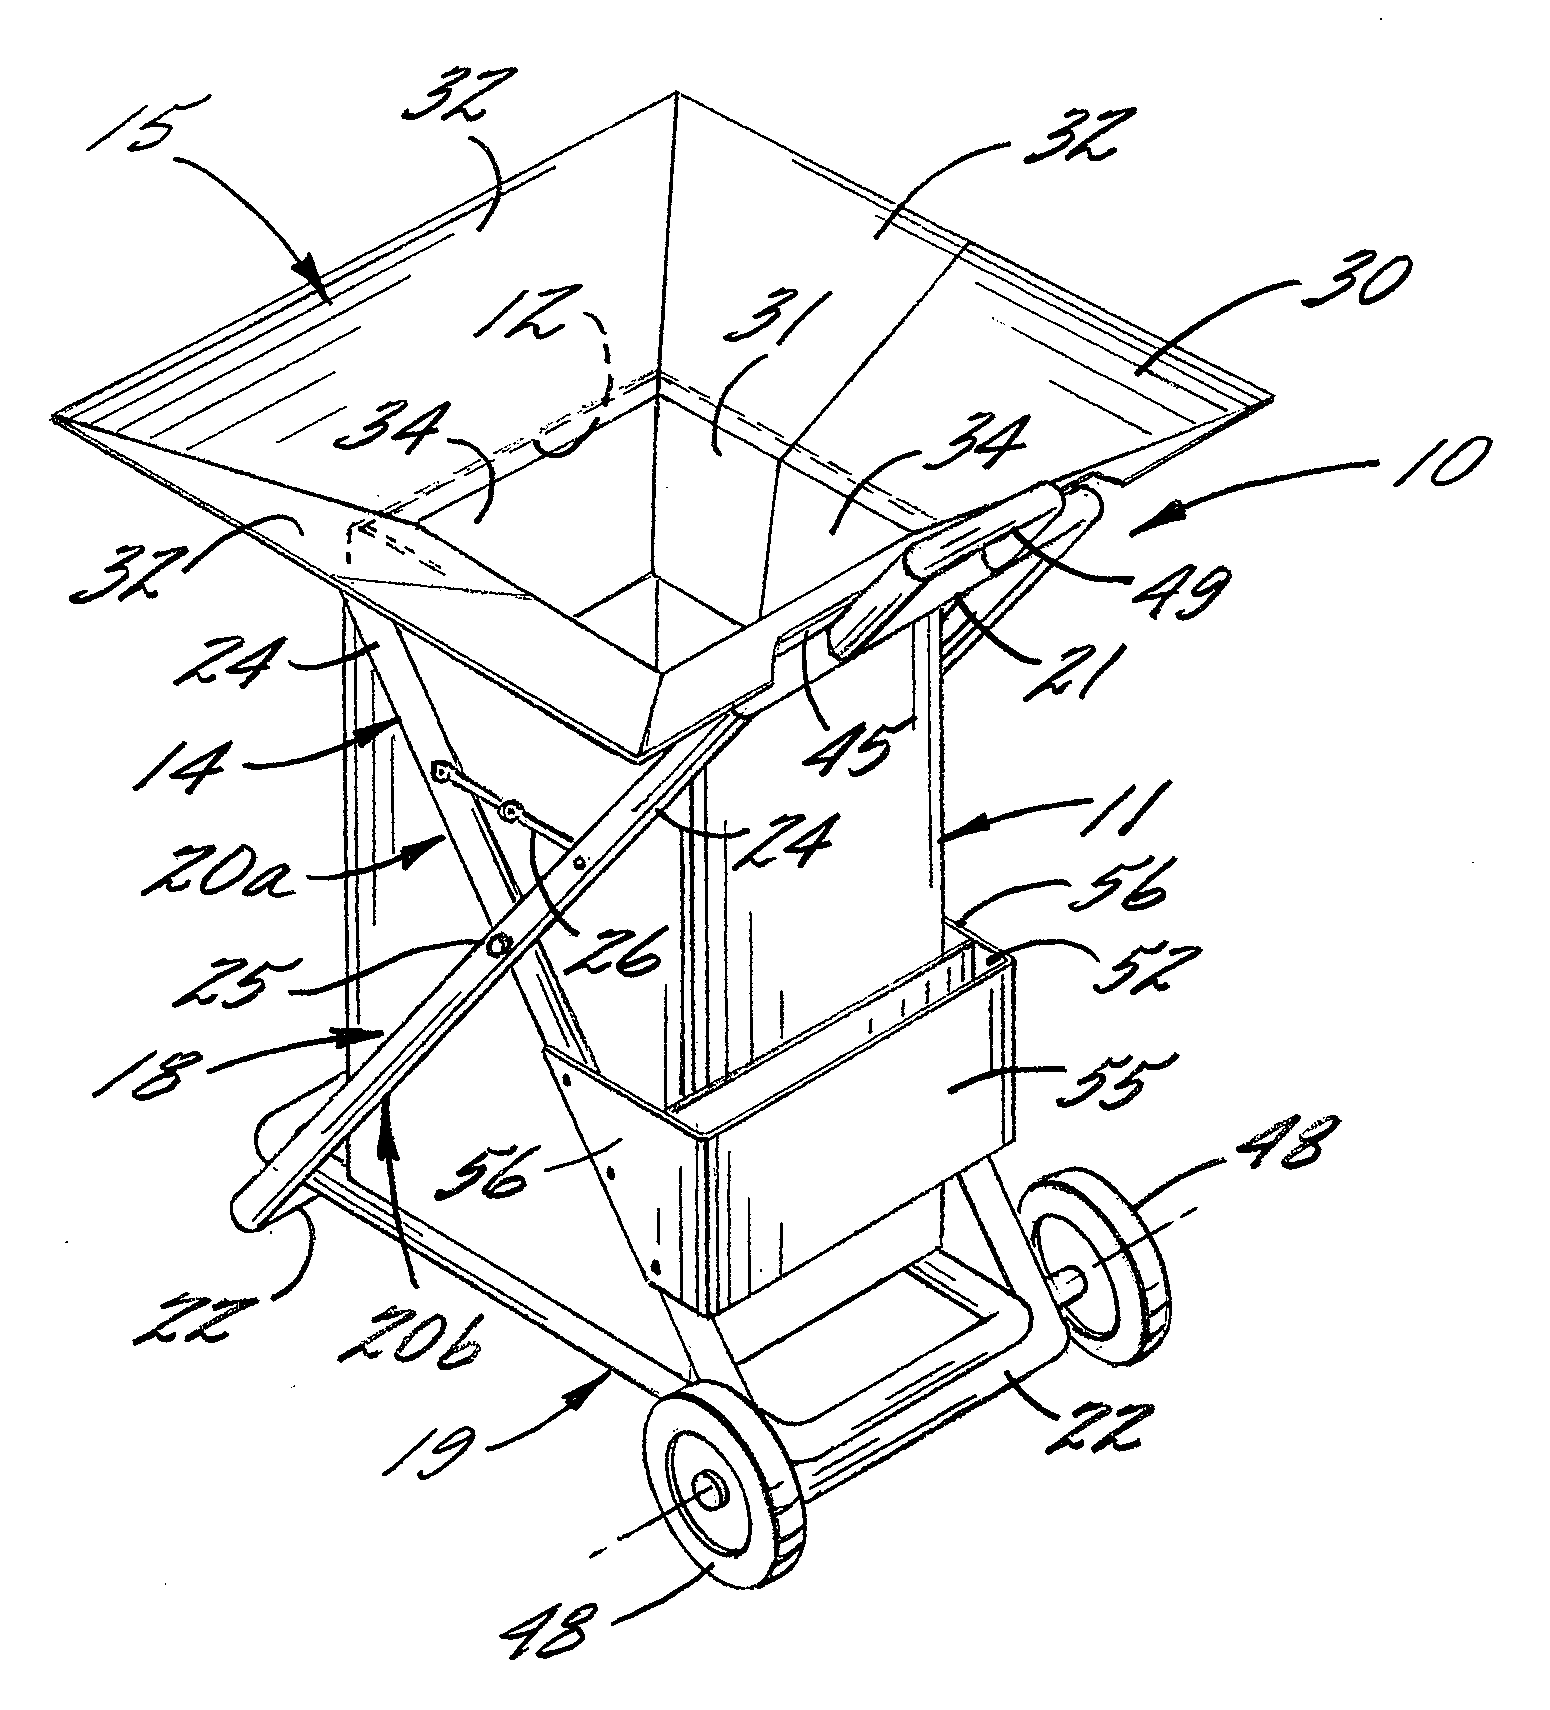 Apparatus and method for filling paper lawn refuse bags